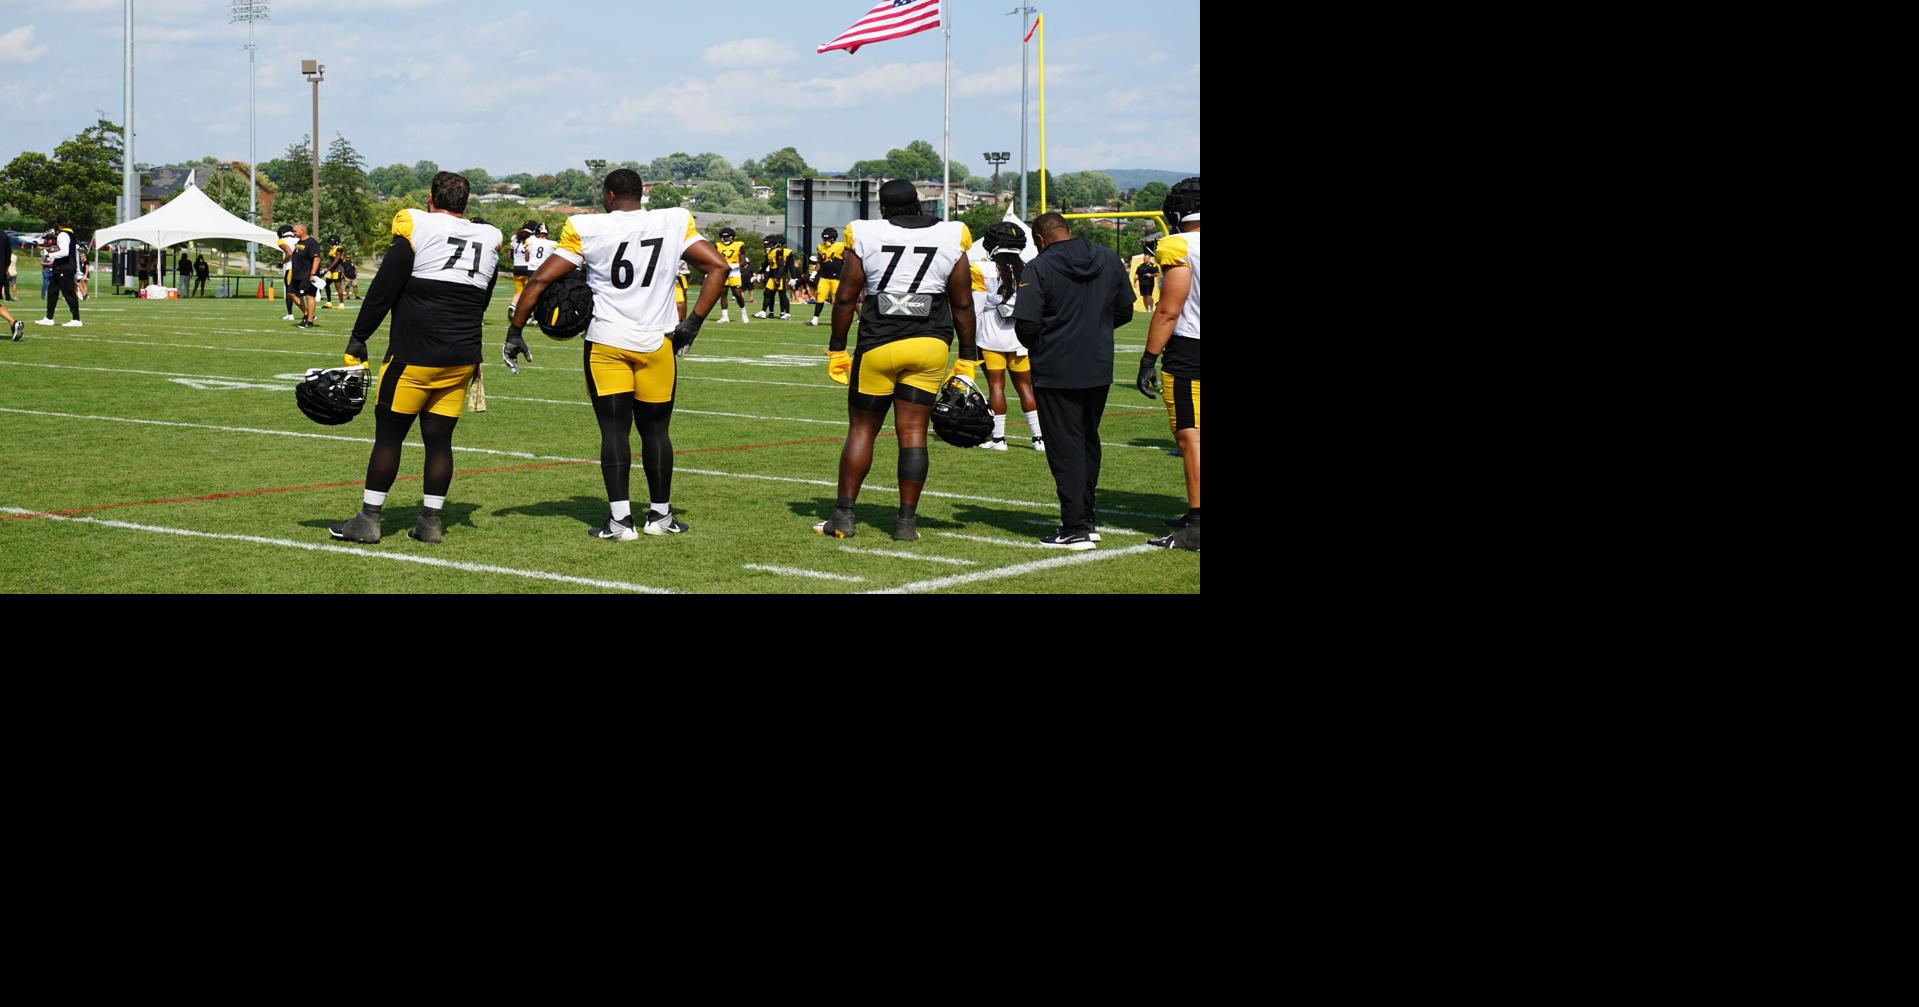 Steelers hold on to beat Buccaneers in first preseason game